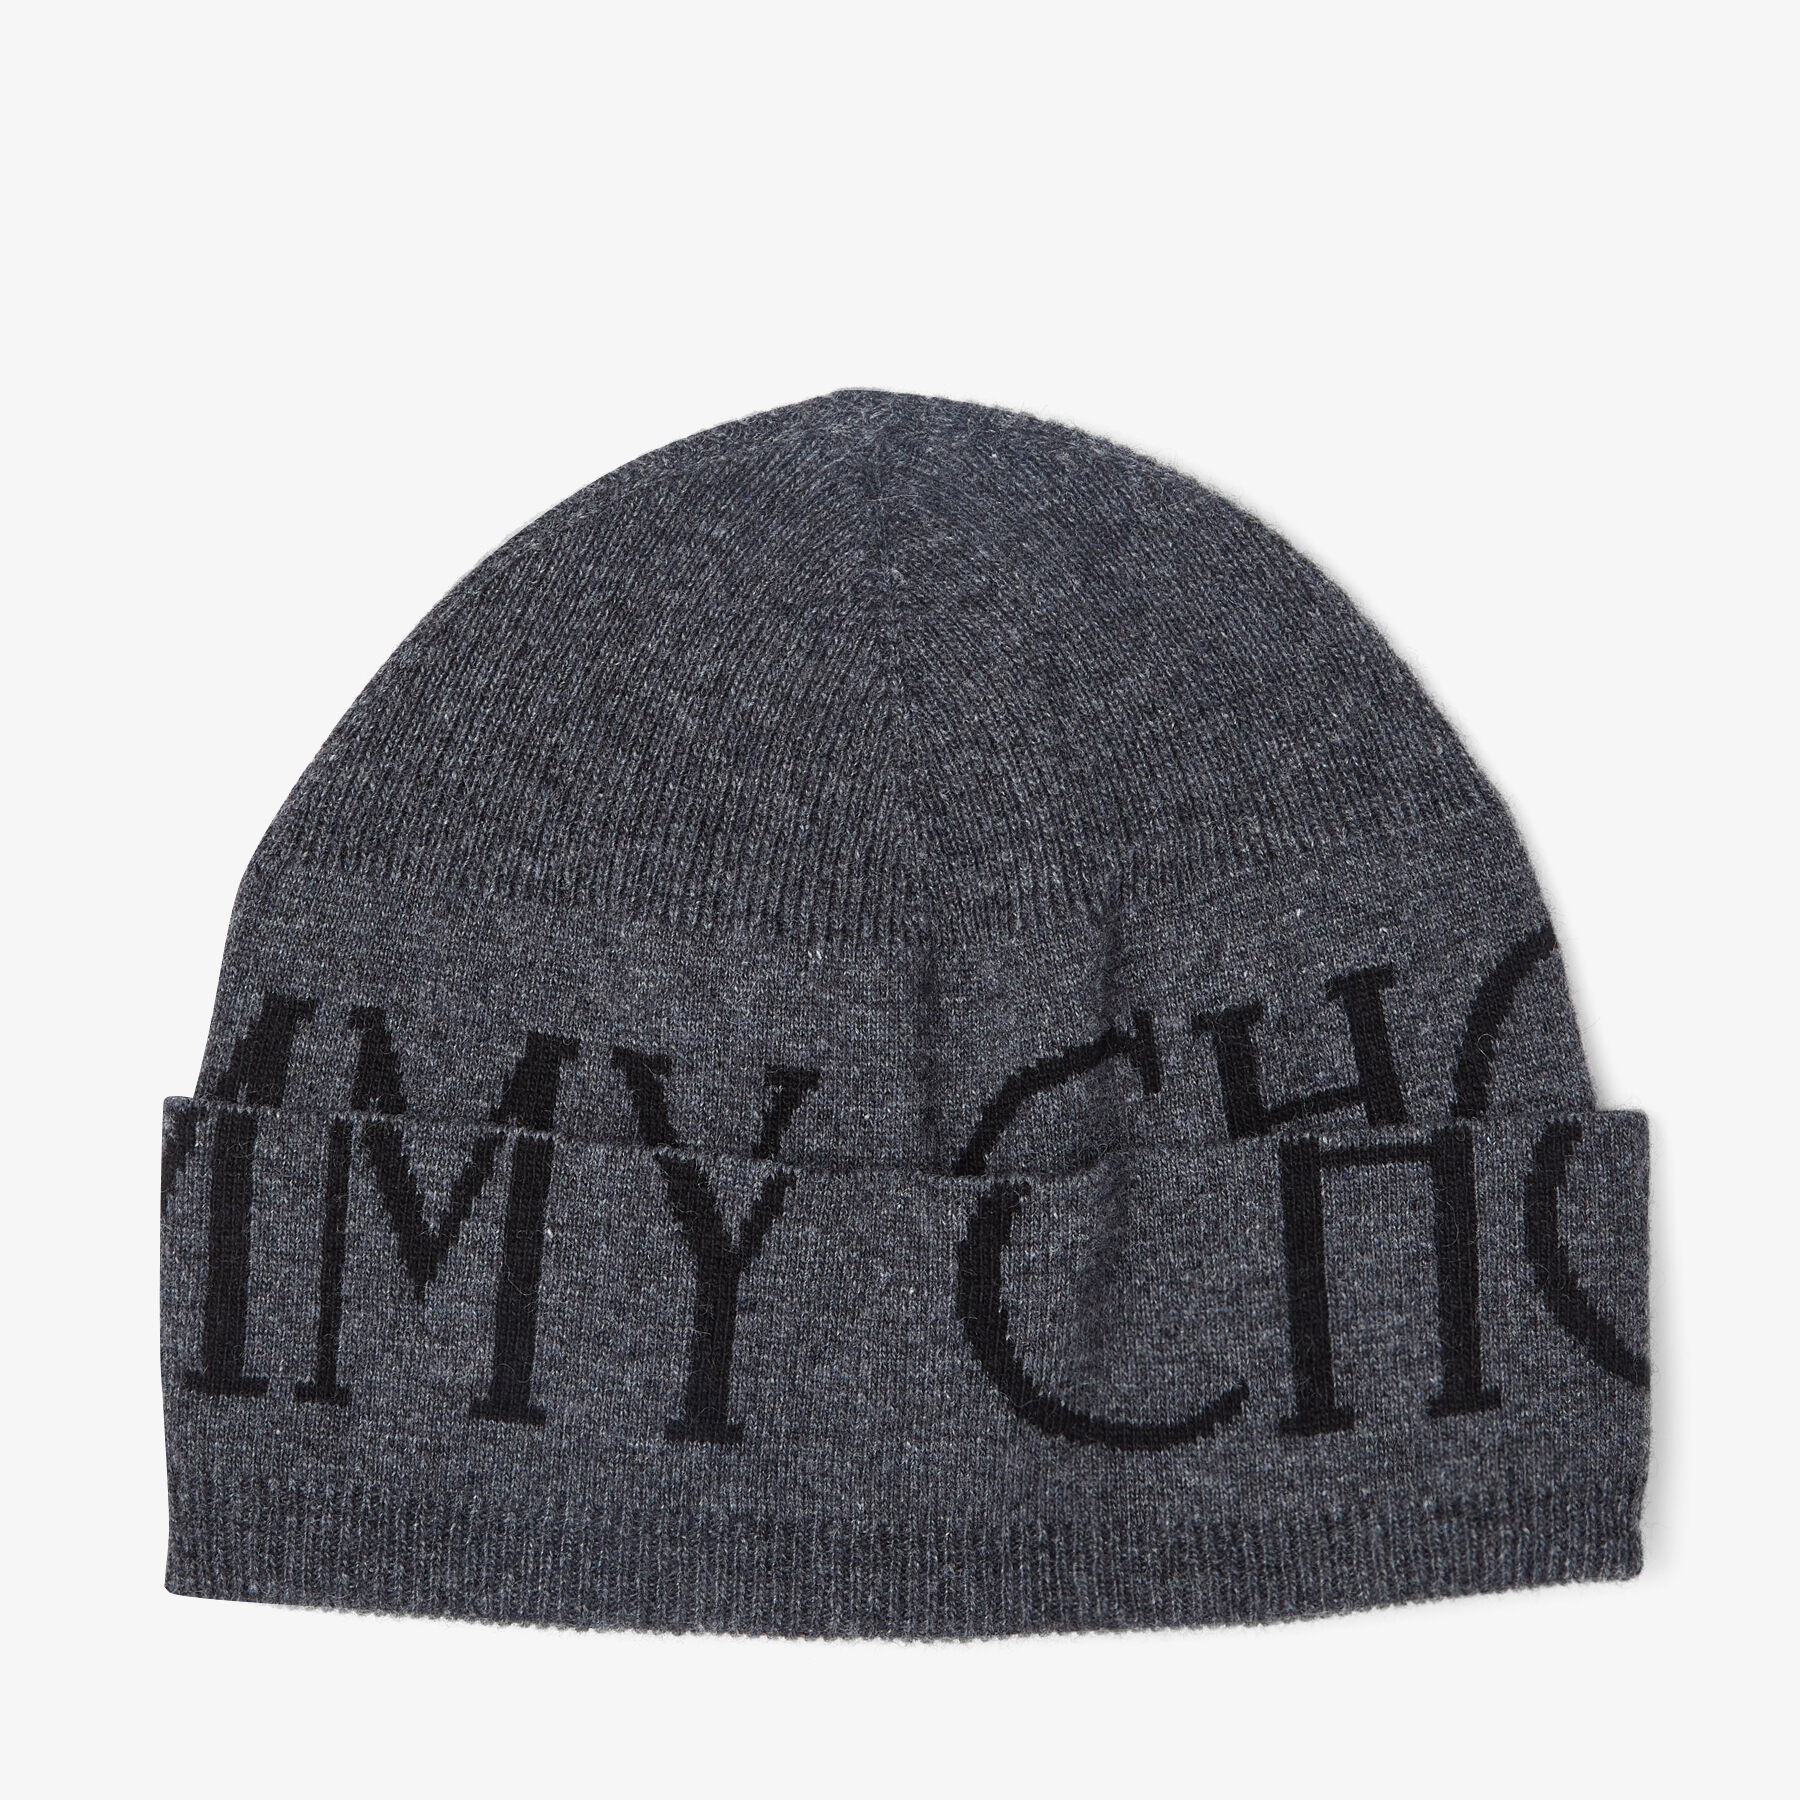 Jens
Marl Grey Wool and Cashmere Hat with Black Jimmy Choo Logo - 1